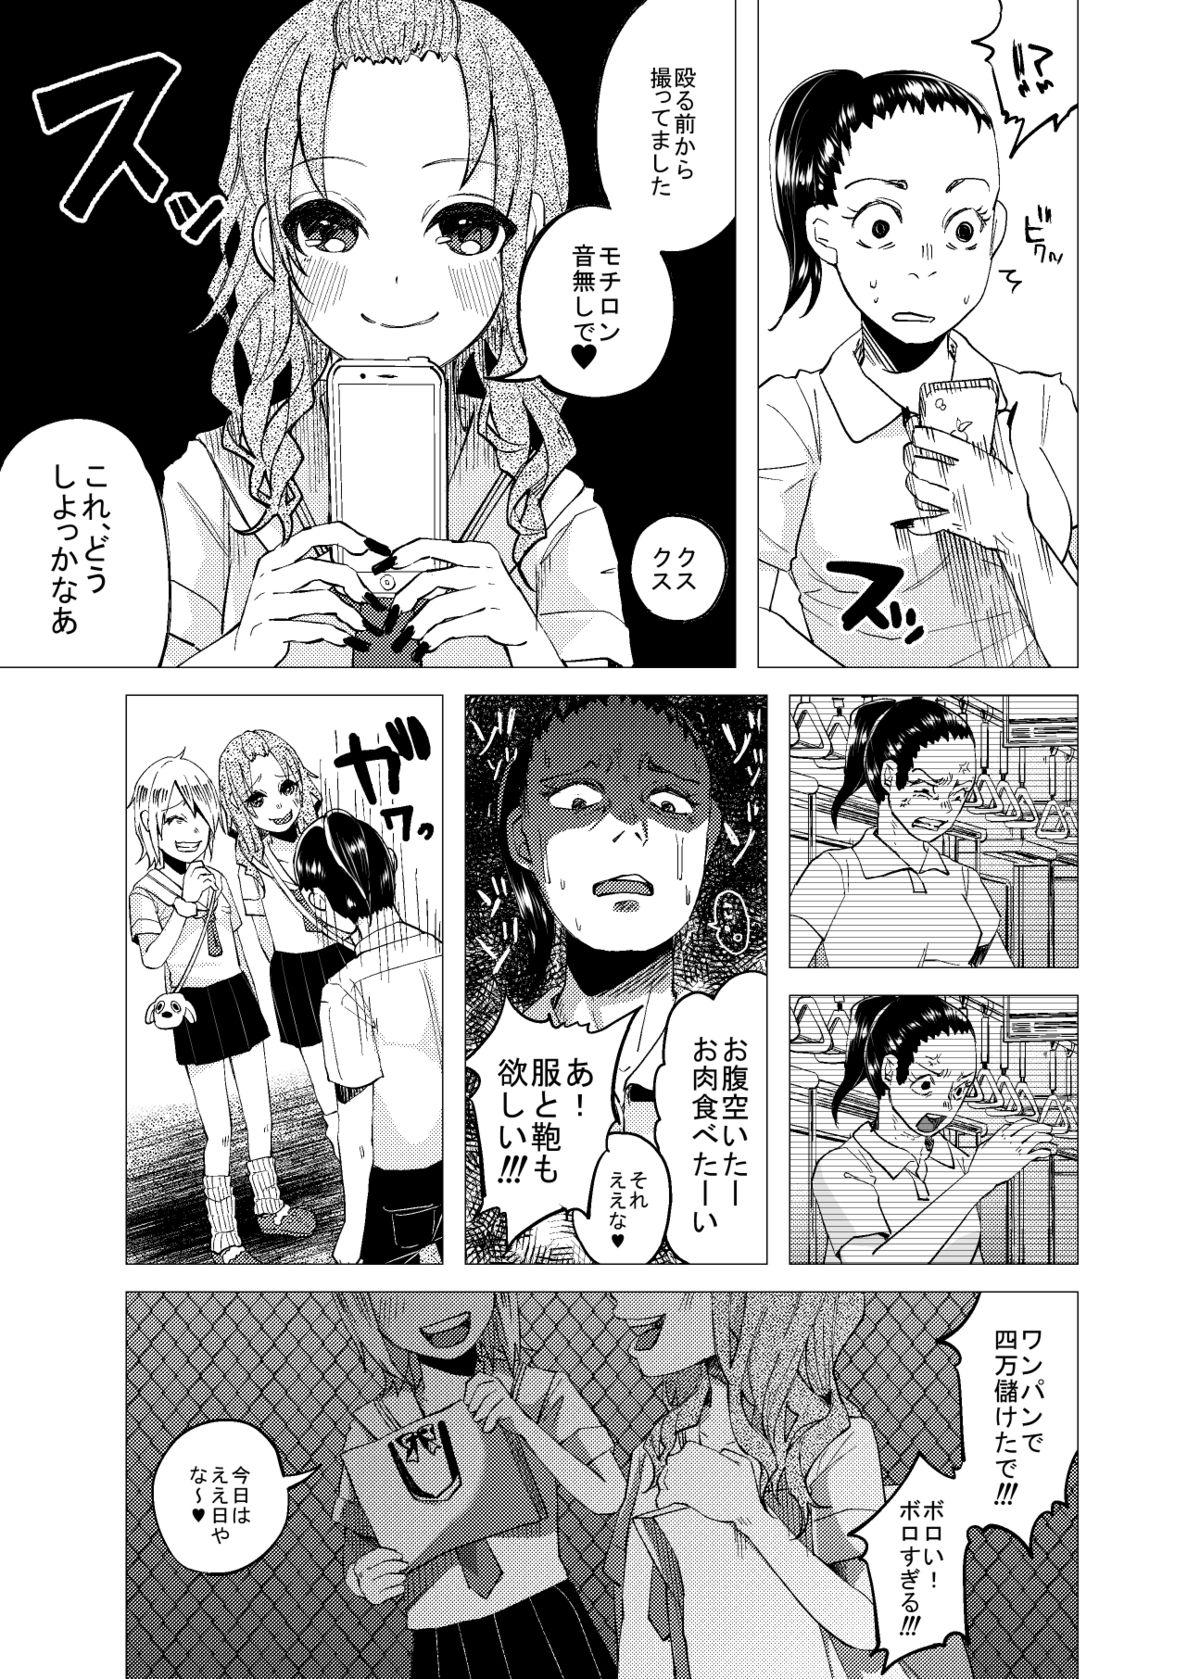 4some くっそ生意気なＪＣをボコボコりんっ！ Submission - Page 5